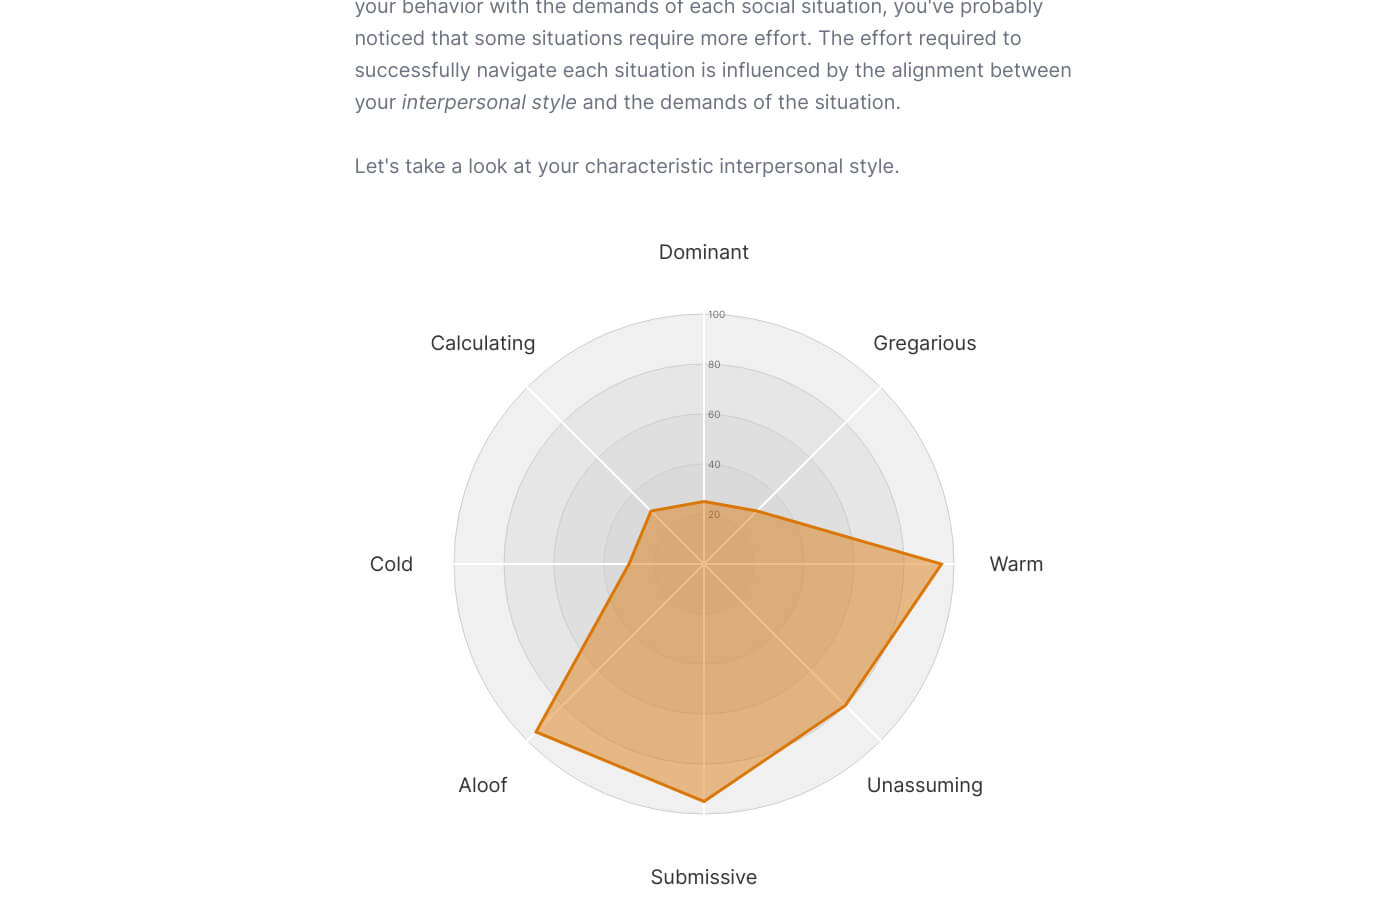 TraitLab describes your interpersonal style and the opportunities and challenges that come along with it, while your type from the Myers-Briggs Type Indicator (MBTI) does not describe interpersonal patterns beyond your given type.